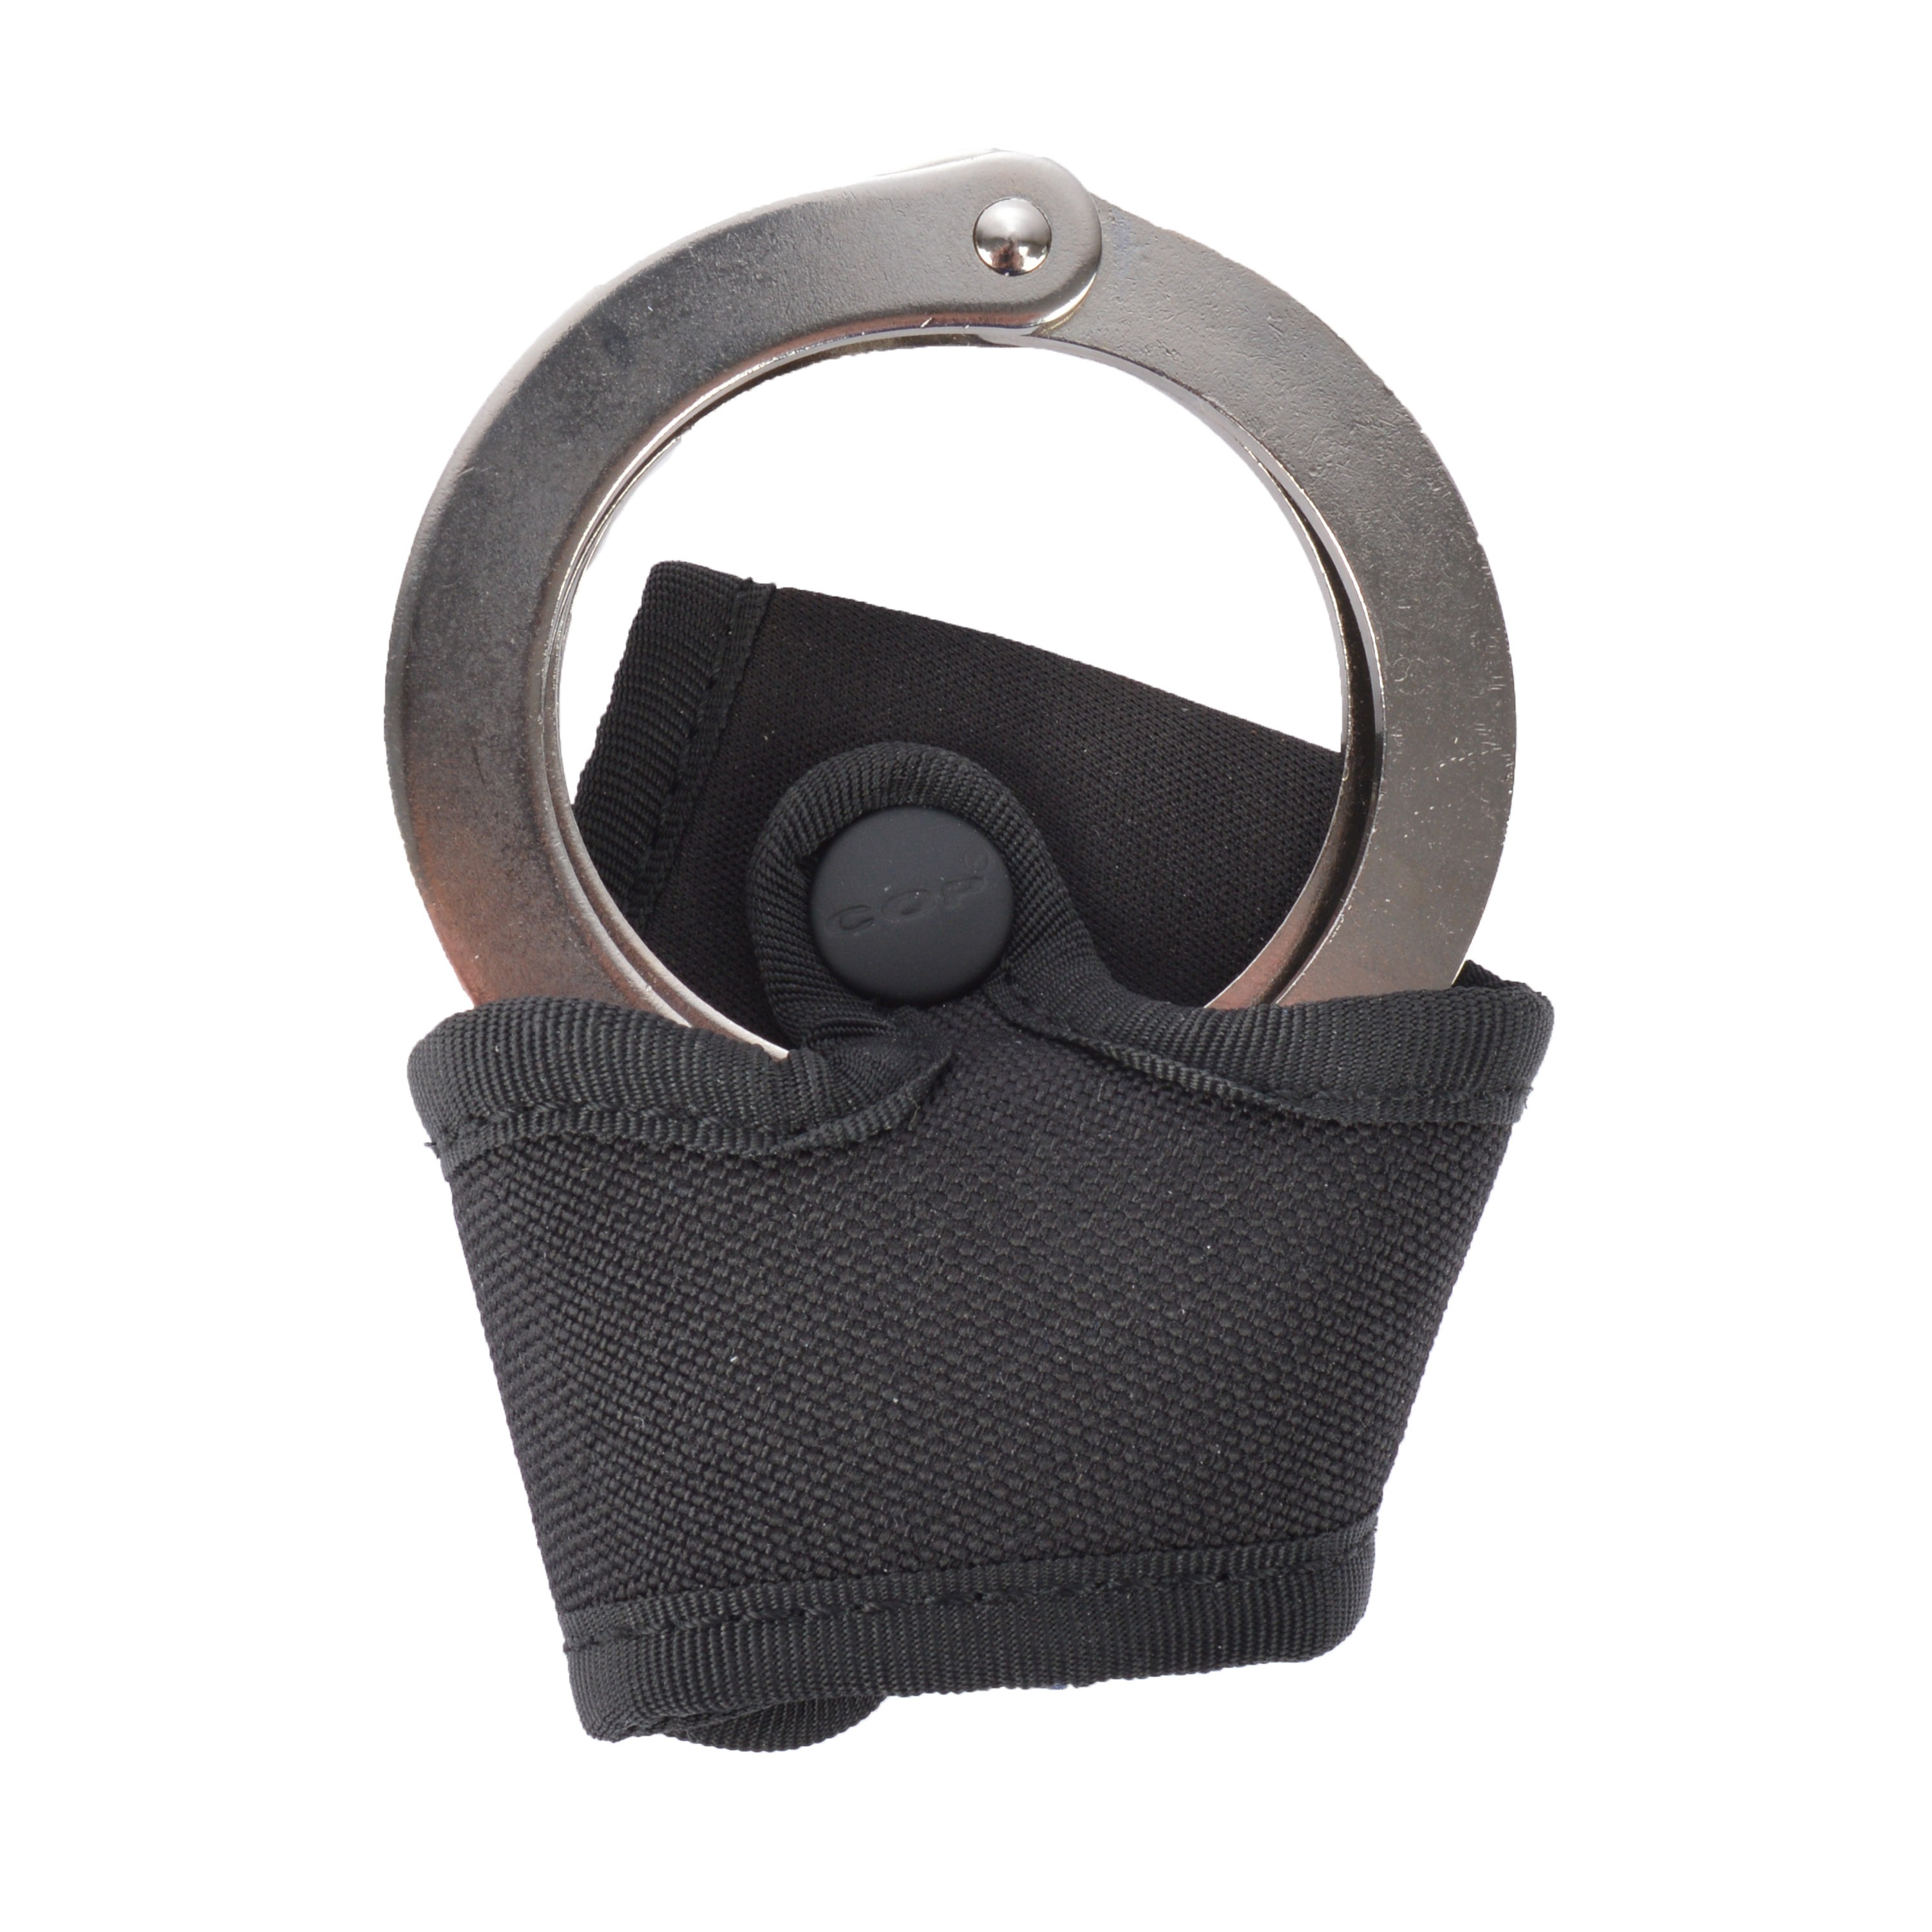 Handcuff Holsters